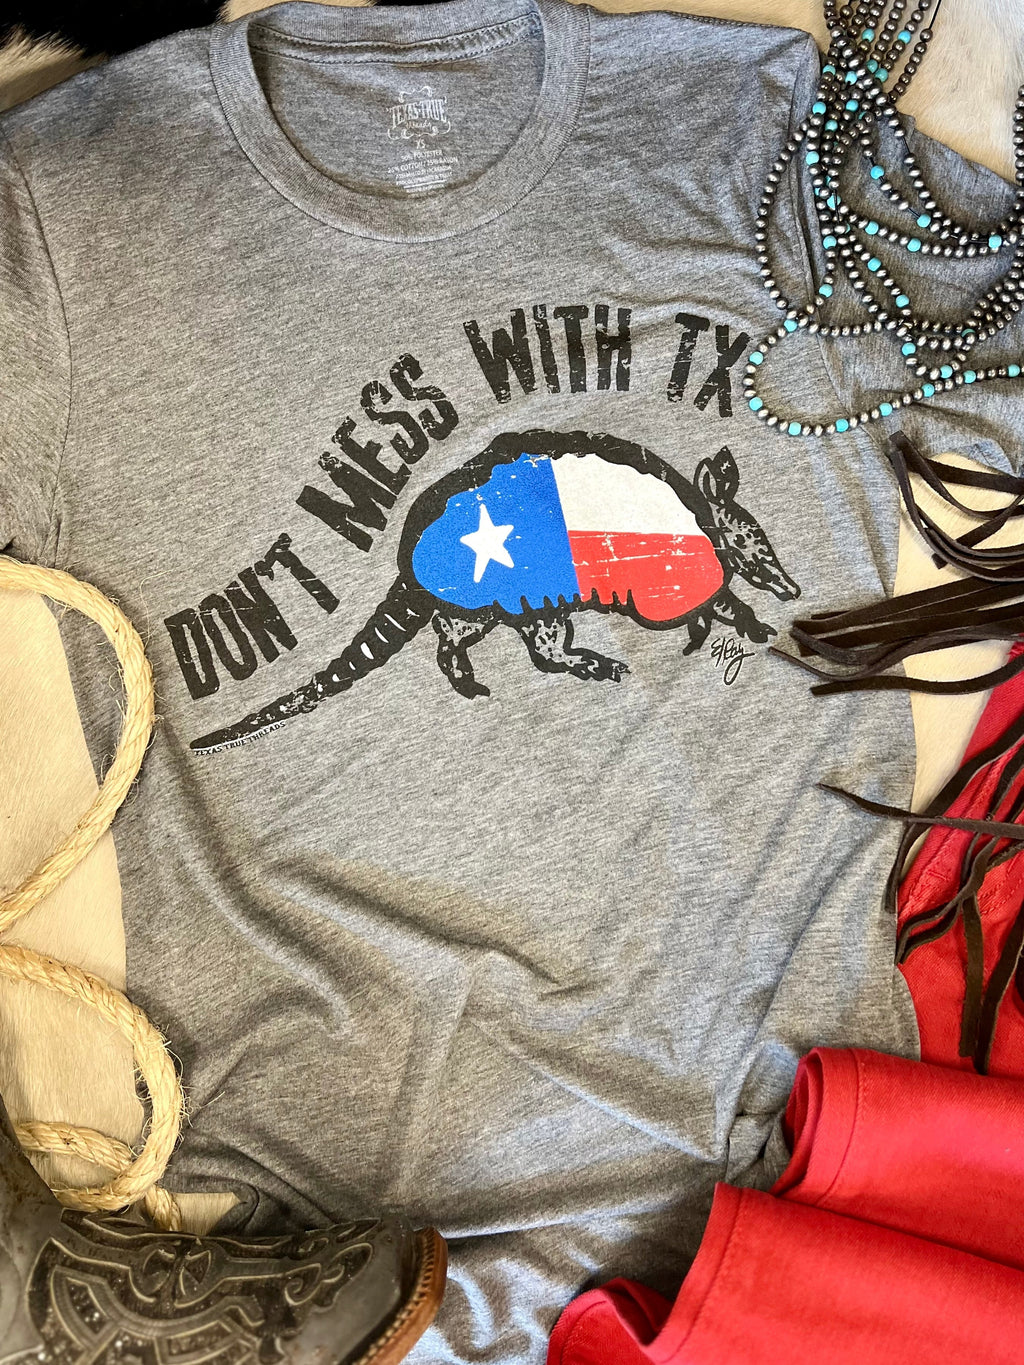 PLUS Don't Mess With Texas Graphic Tee